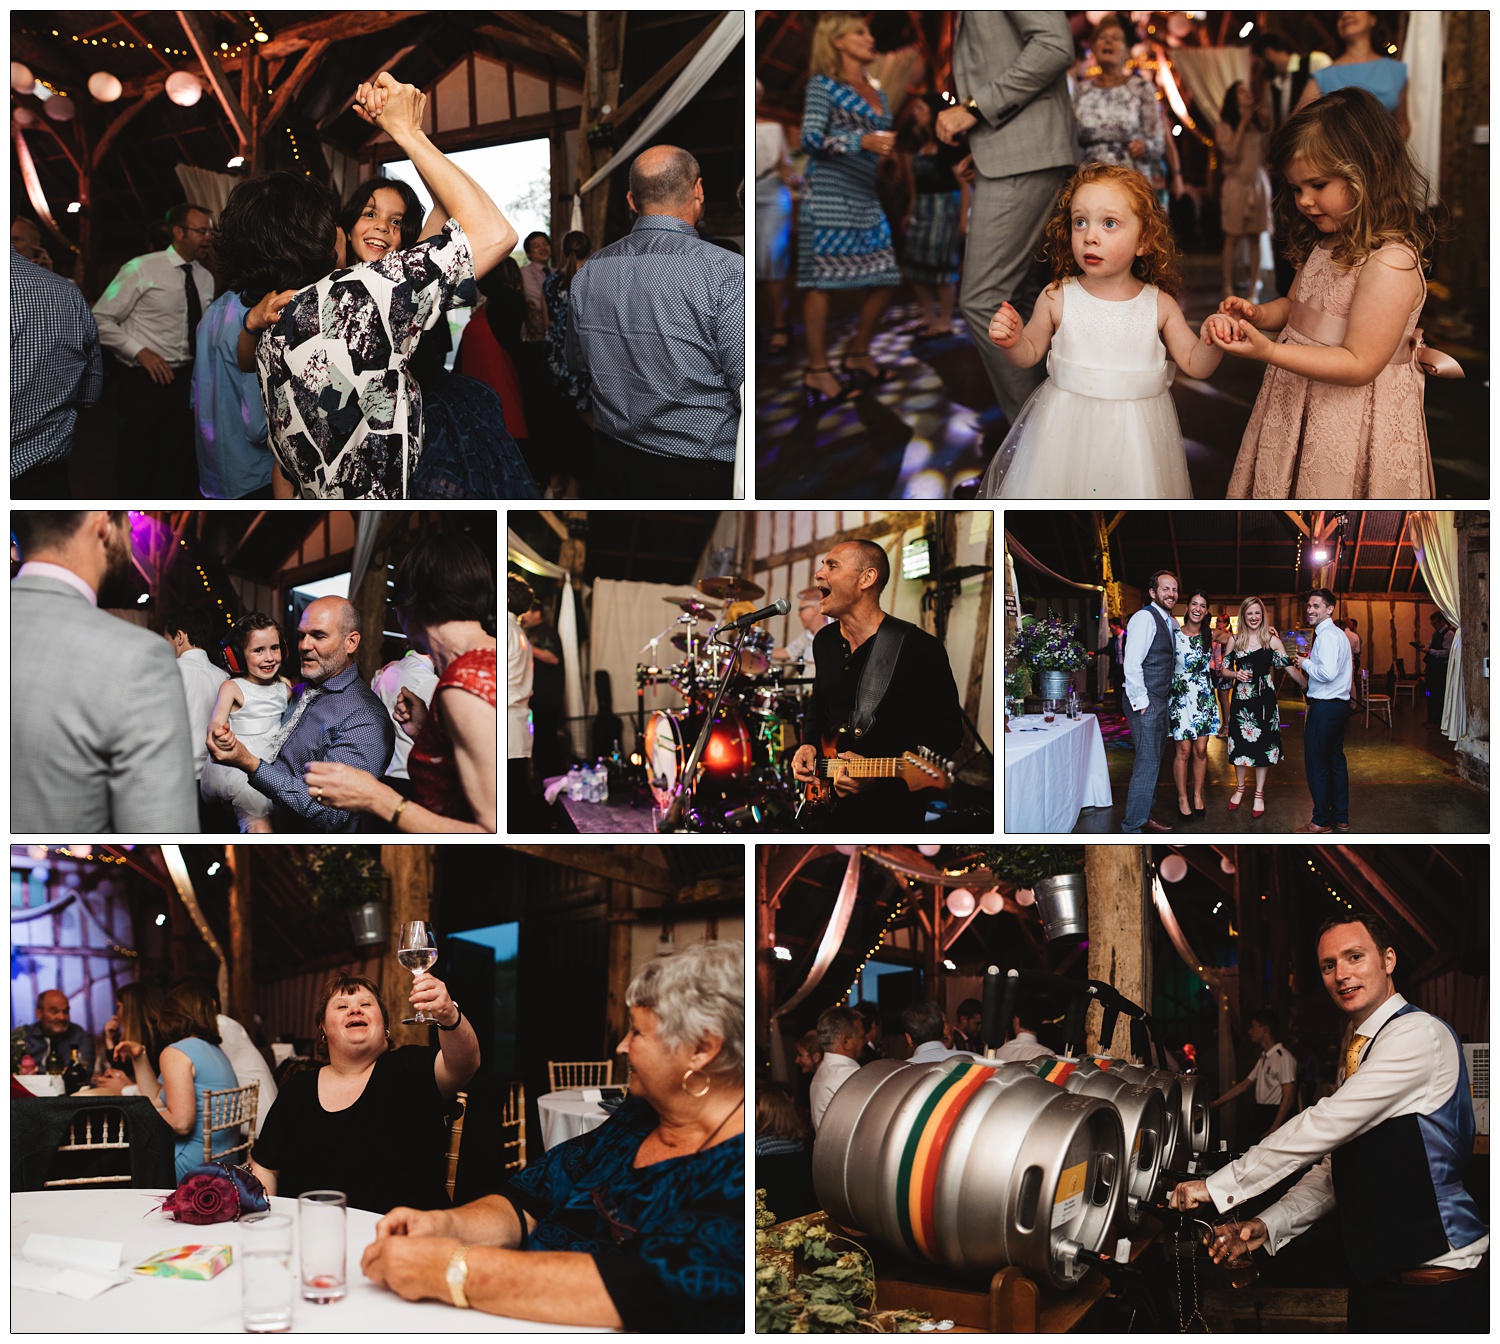 A selection of photos from a wedding reception in Suffolk. A man pours beer from a barrell, a woman raises a glass.